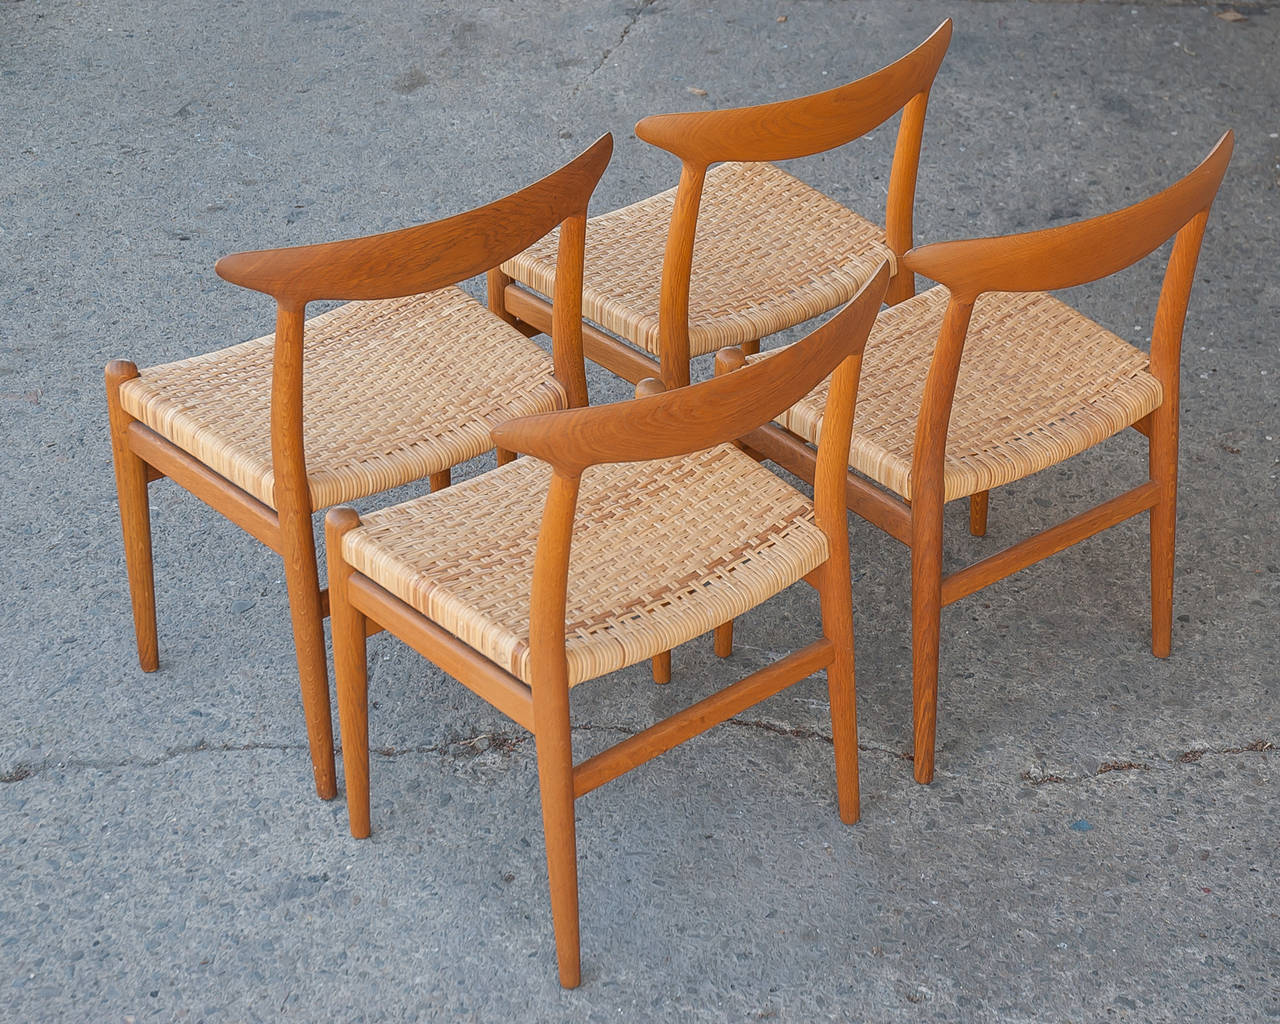 Hans Wegner vintage dining set/four chairs with wood frame and cane seat.
Hans Wegner, “Heart Chair,” for CM Madsens, 1953, Denmark.
Flat banana back form with replaced cane seats.
Solid oak frames restored with natural oiled finish with newly